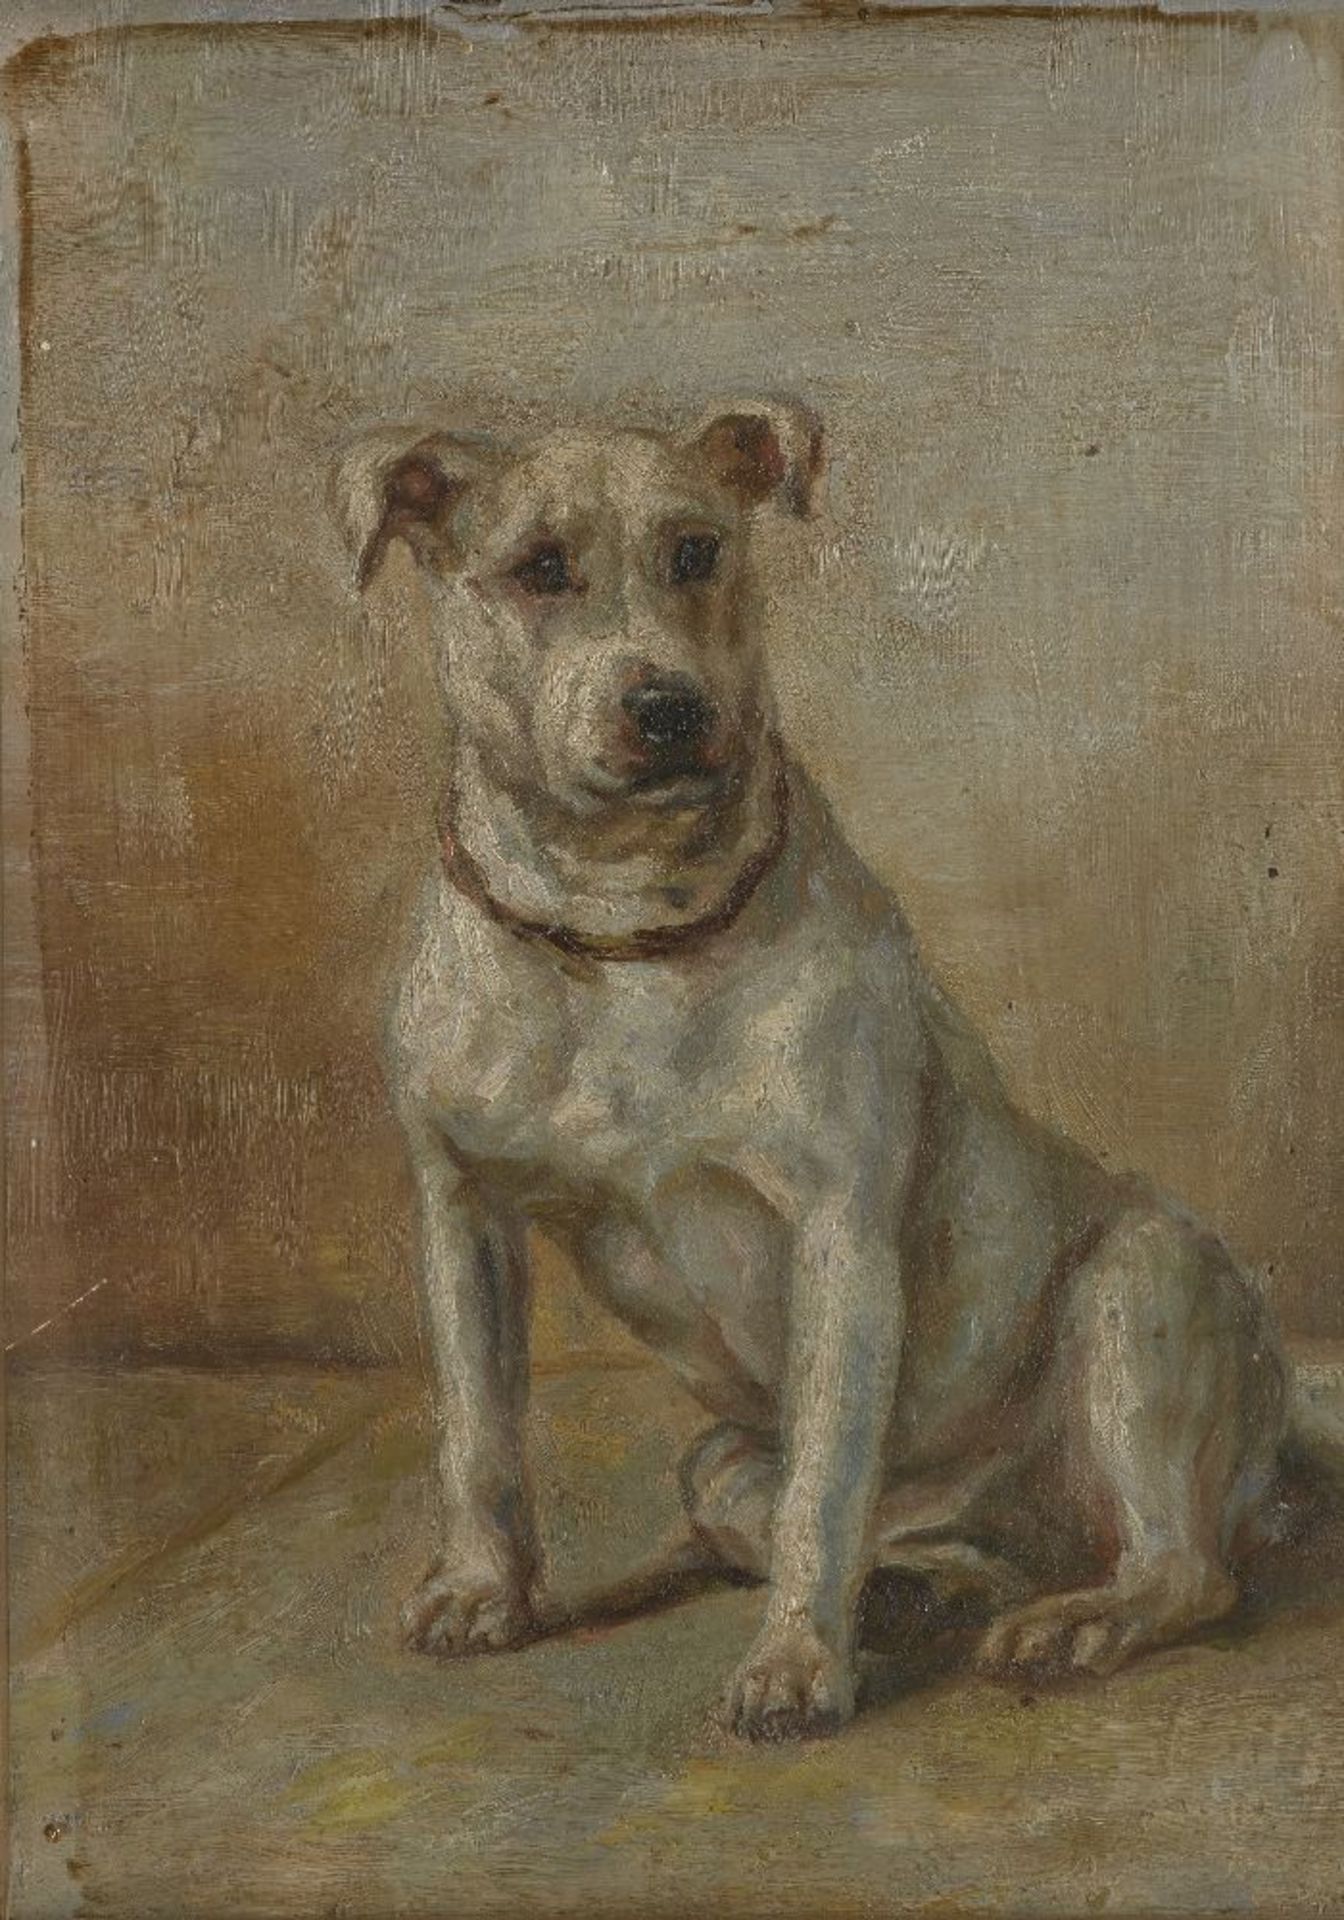 British School, late 19th/early 20th century- Study of a Bull Terrier; oil on panel, 16.5x11.5cm